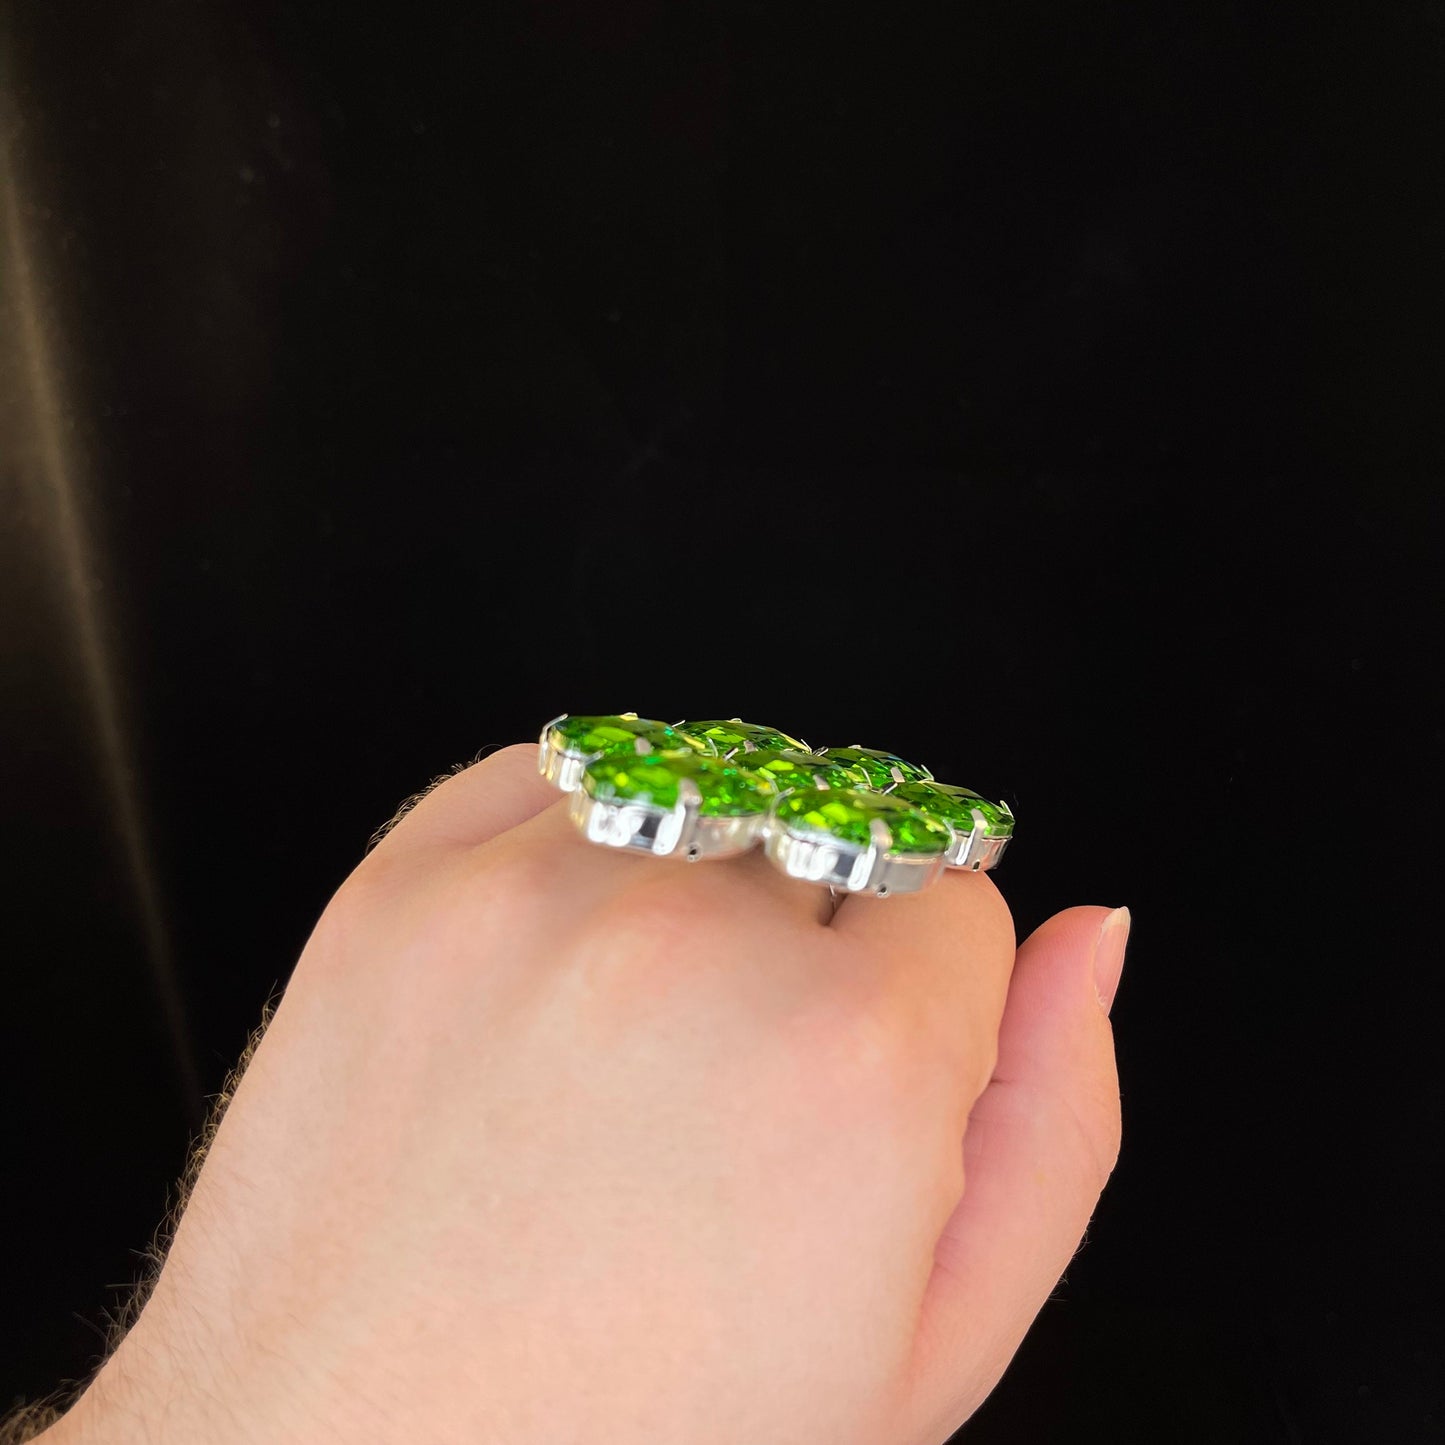 Stunning Ring / Cocktail Dress Ring / Adjustable back / Gift / Drag Queen Ring /Large Costume Jewellery Ring